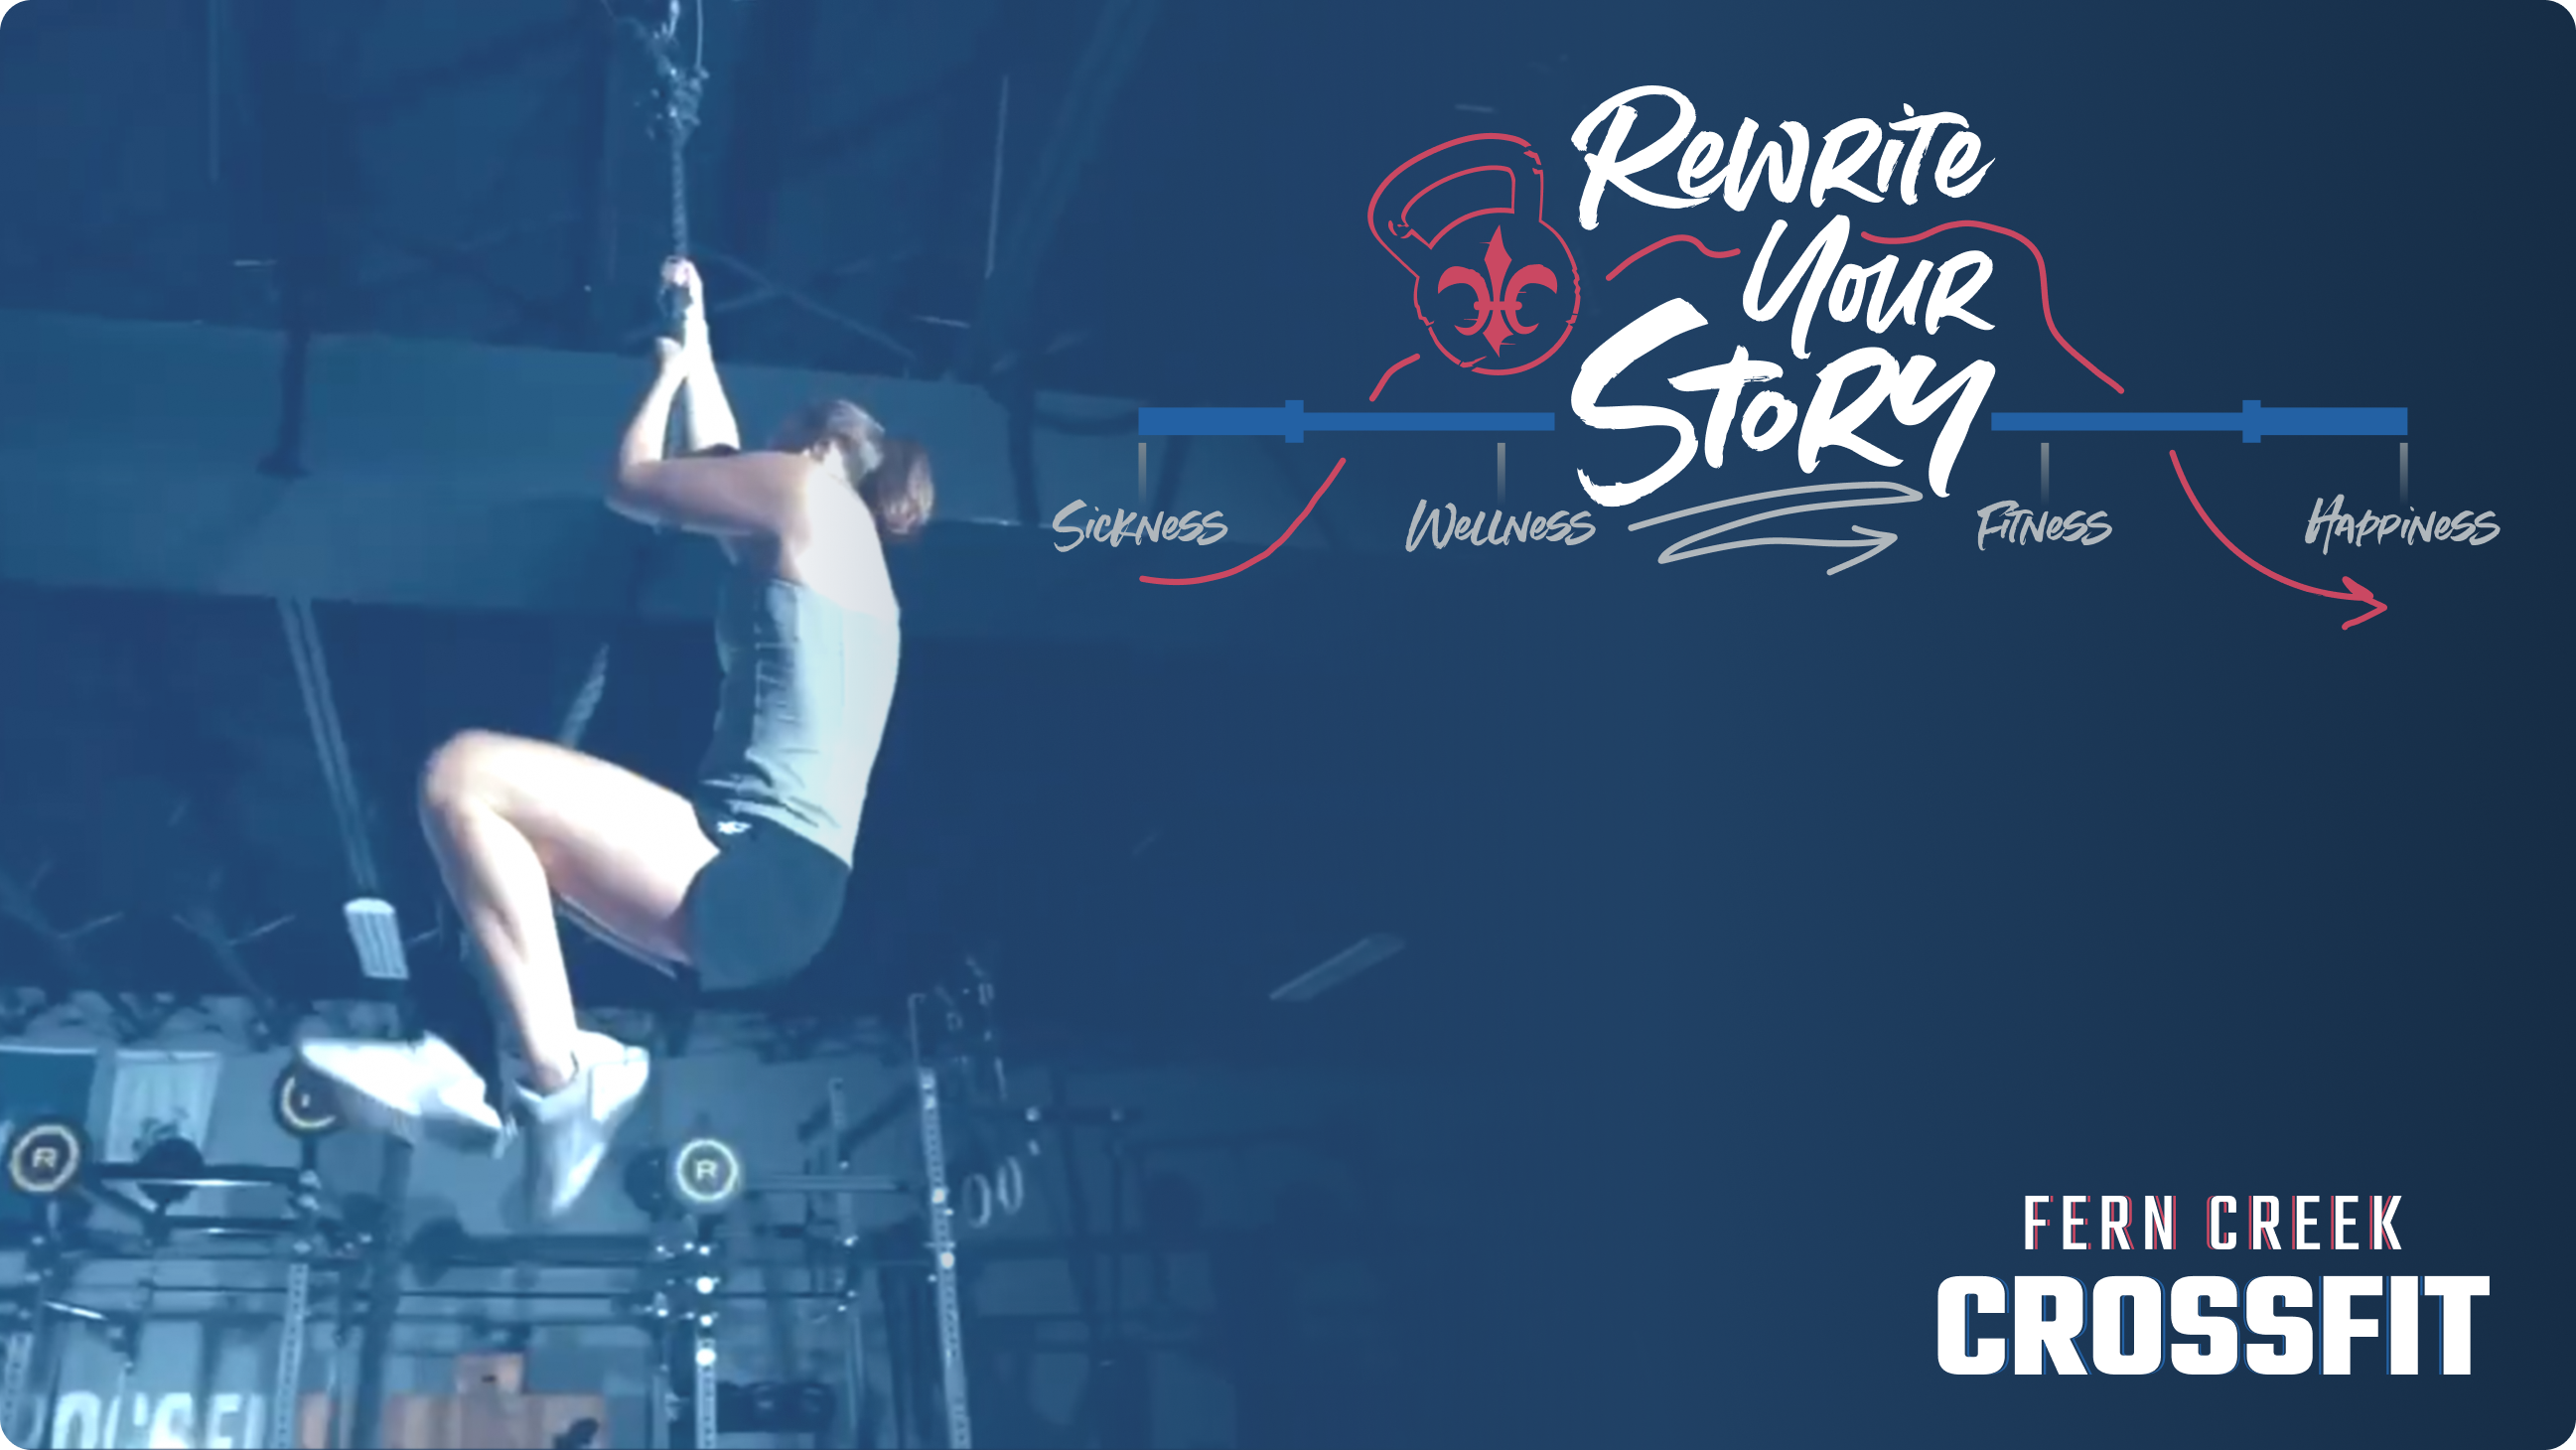 Rewrite your story and get healthy at Fern Creek CrossFit.